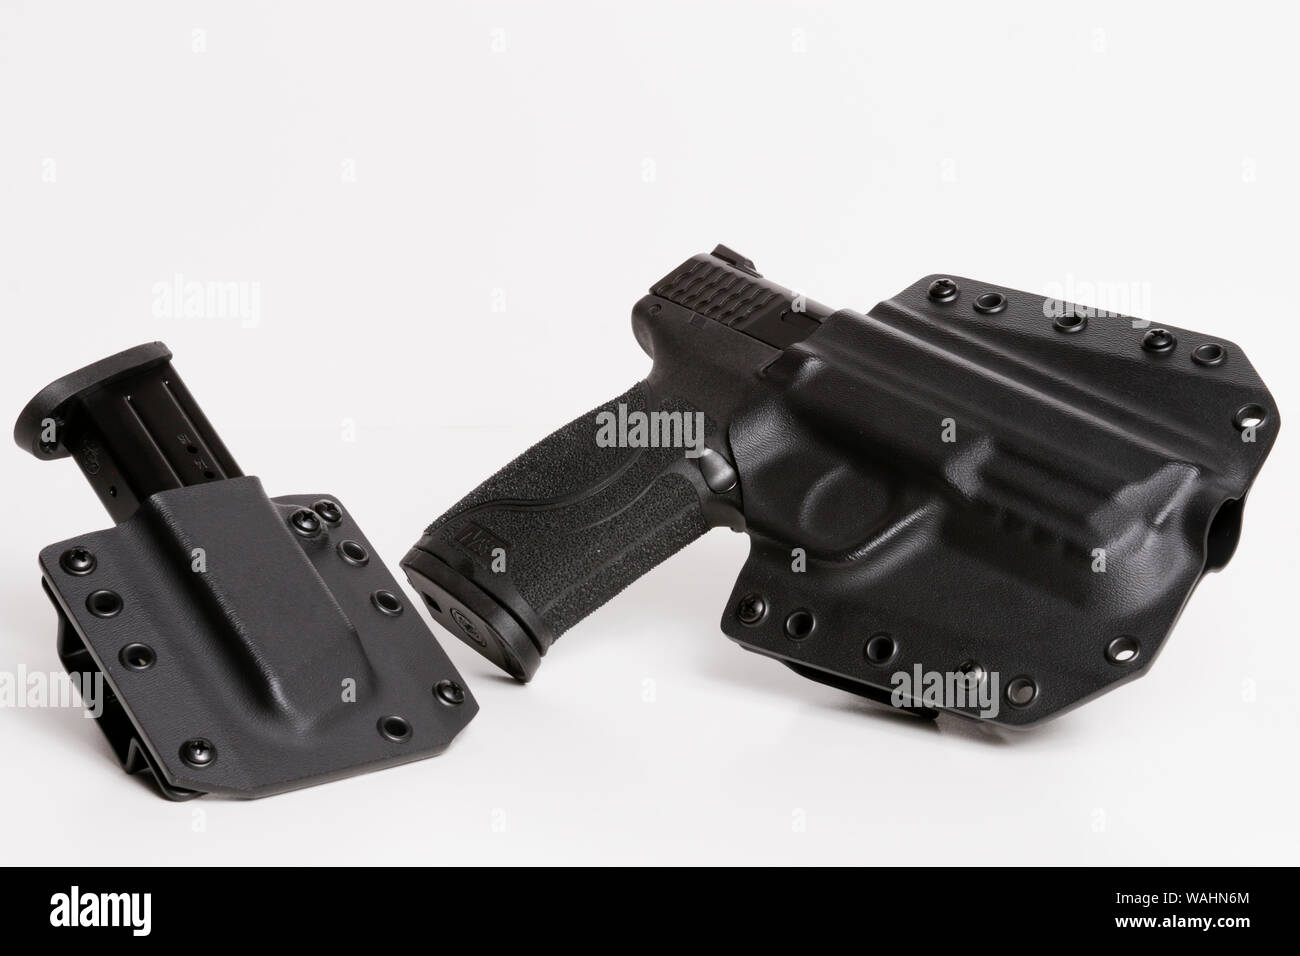 Smith and Wesson 9mm in Bravo Concealment Holster with Extra Magazine Stock Photo